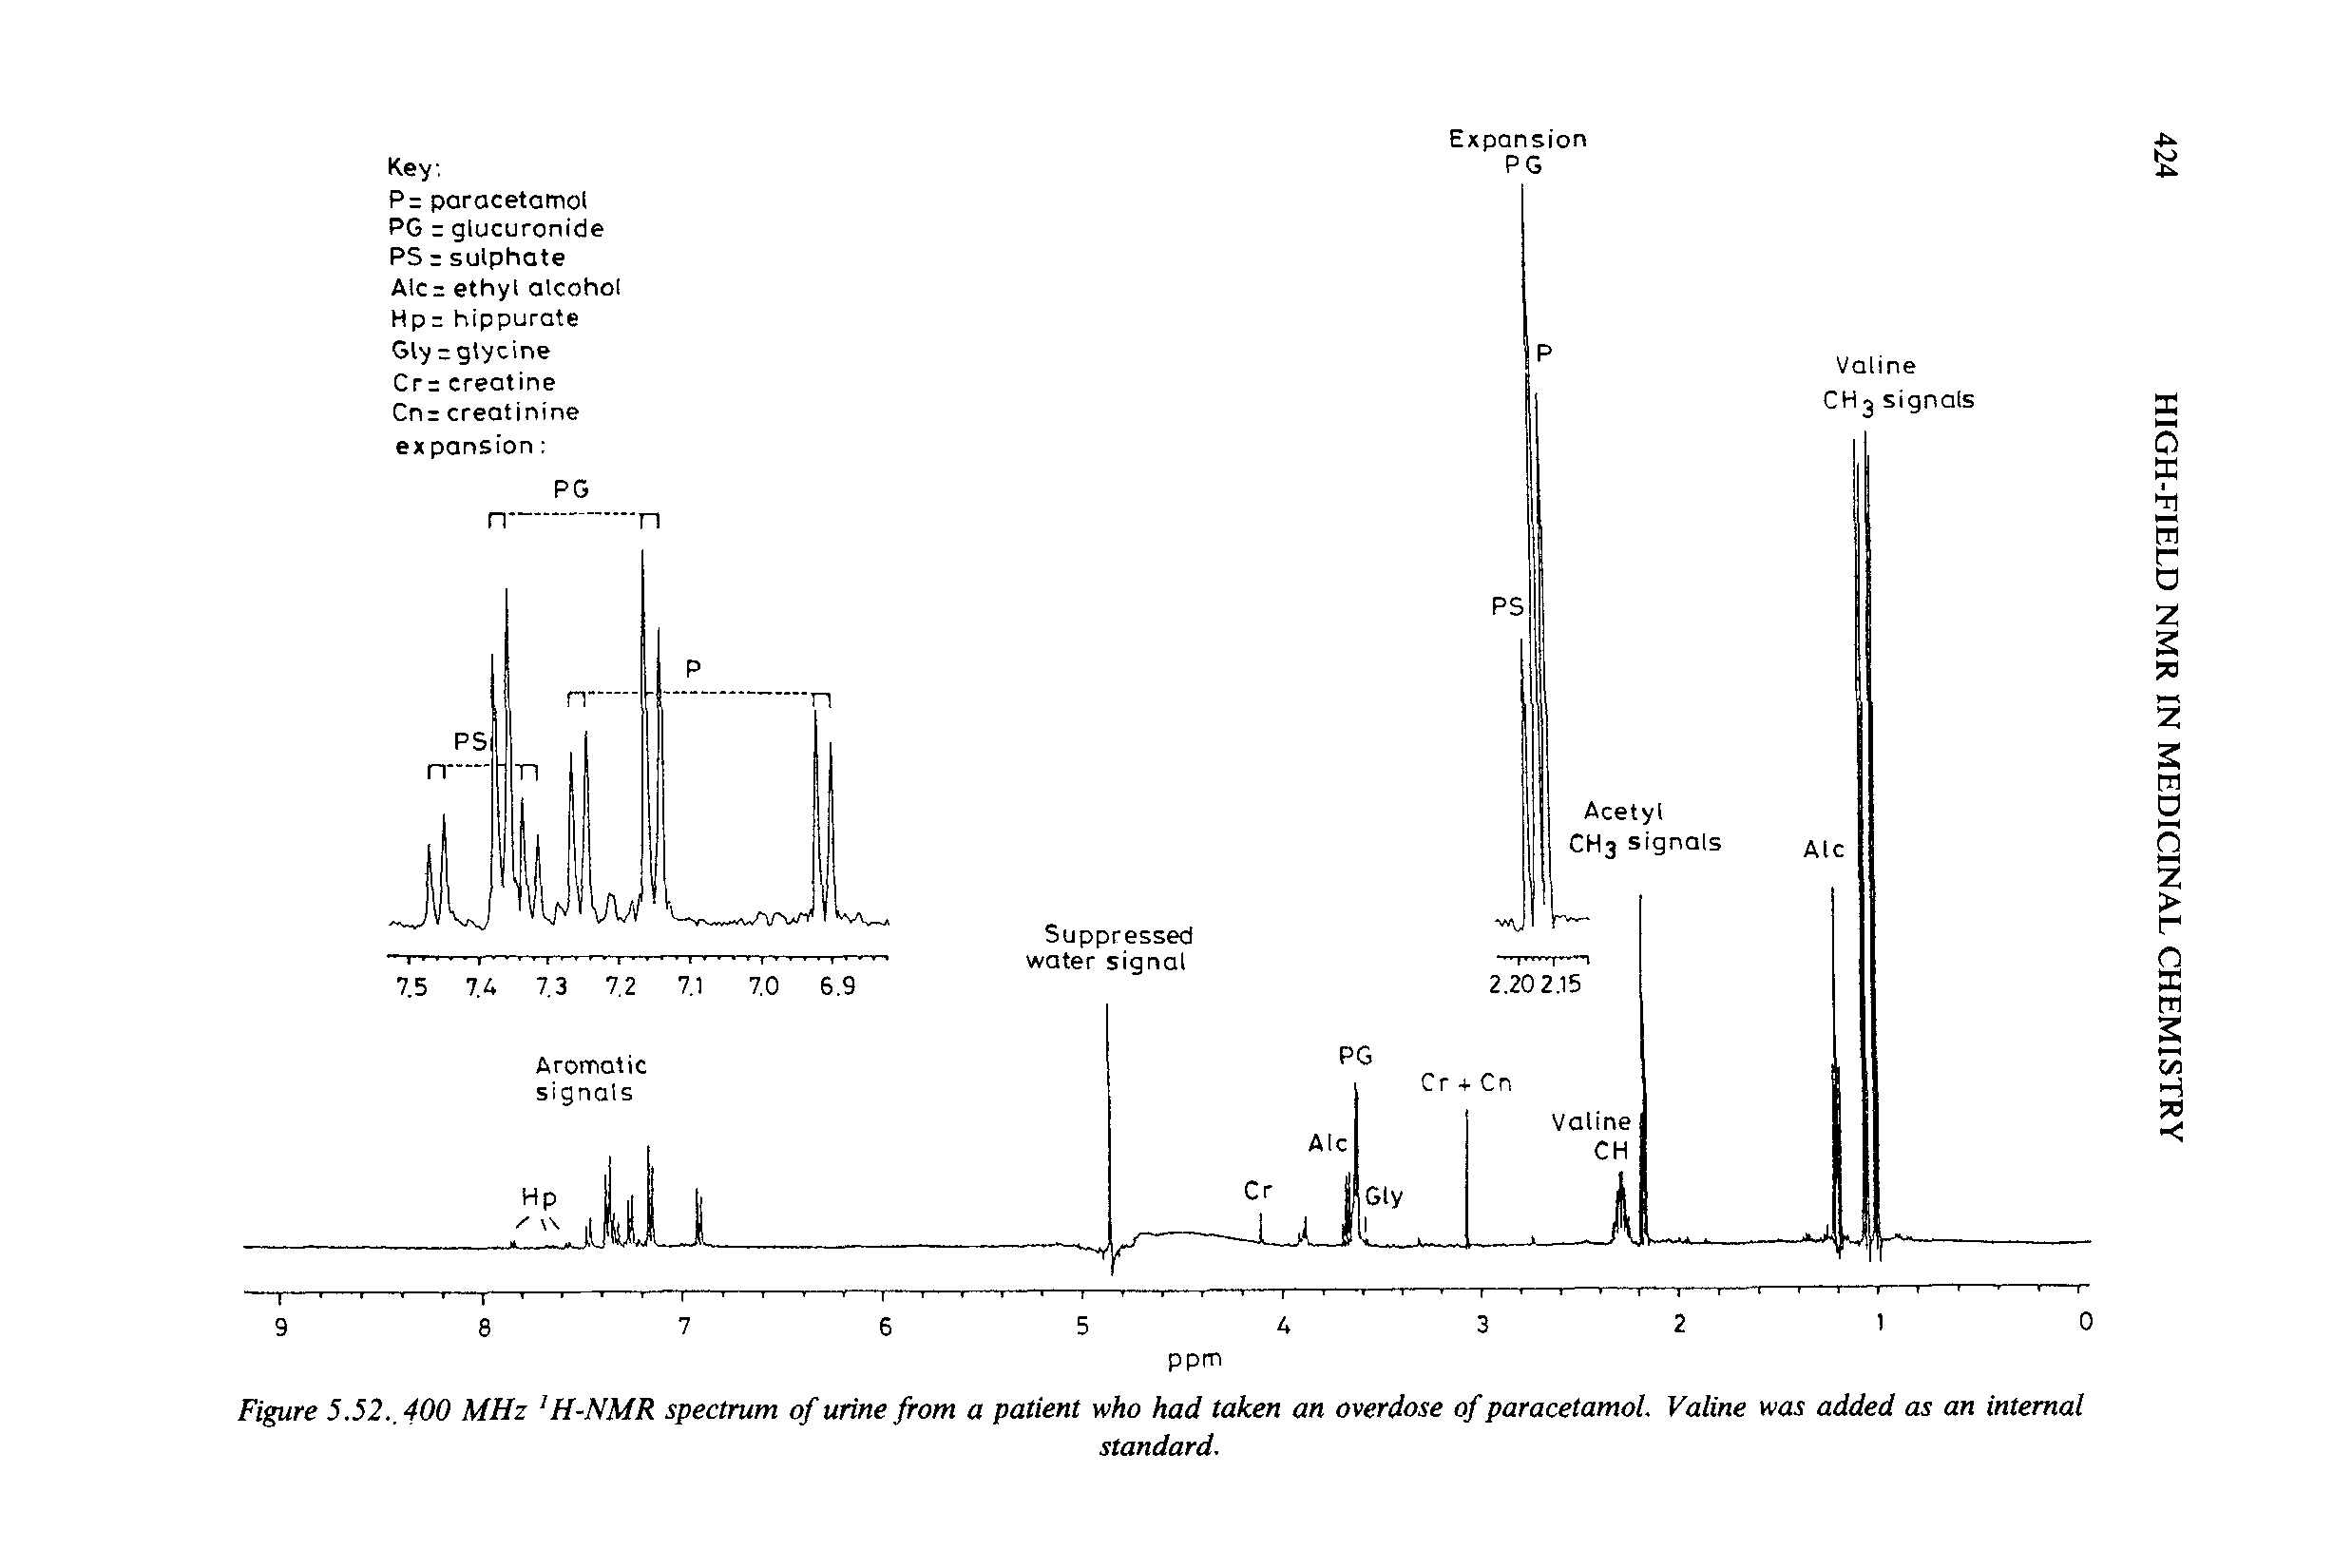 Figure 5.52., 400 MHz H-NMR spectrum of urine from a patient who had taken an overdose of paracetamol. Valine was added as an internal...